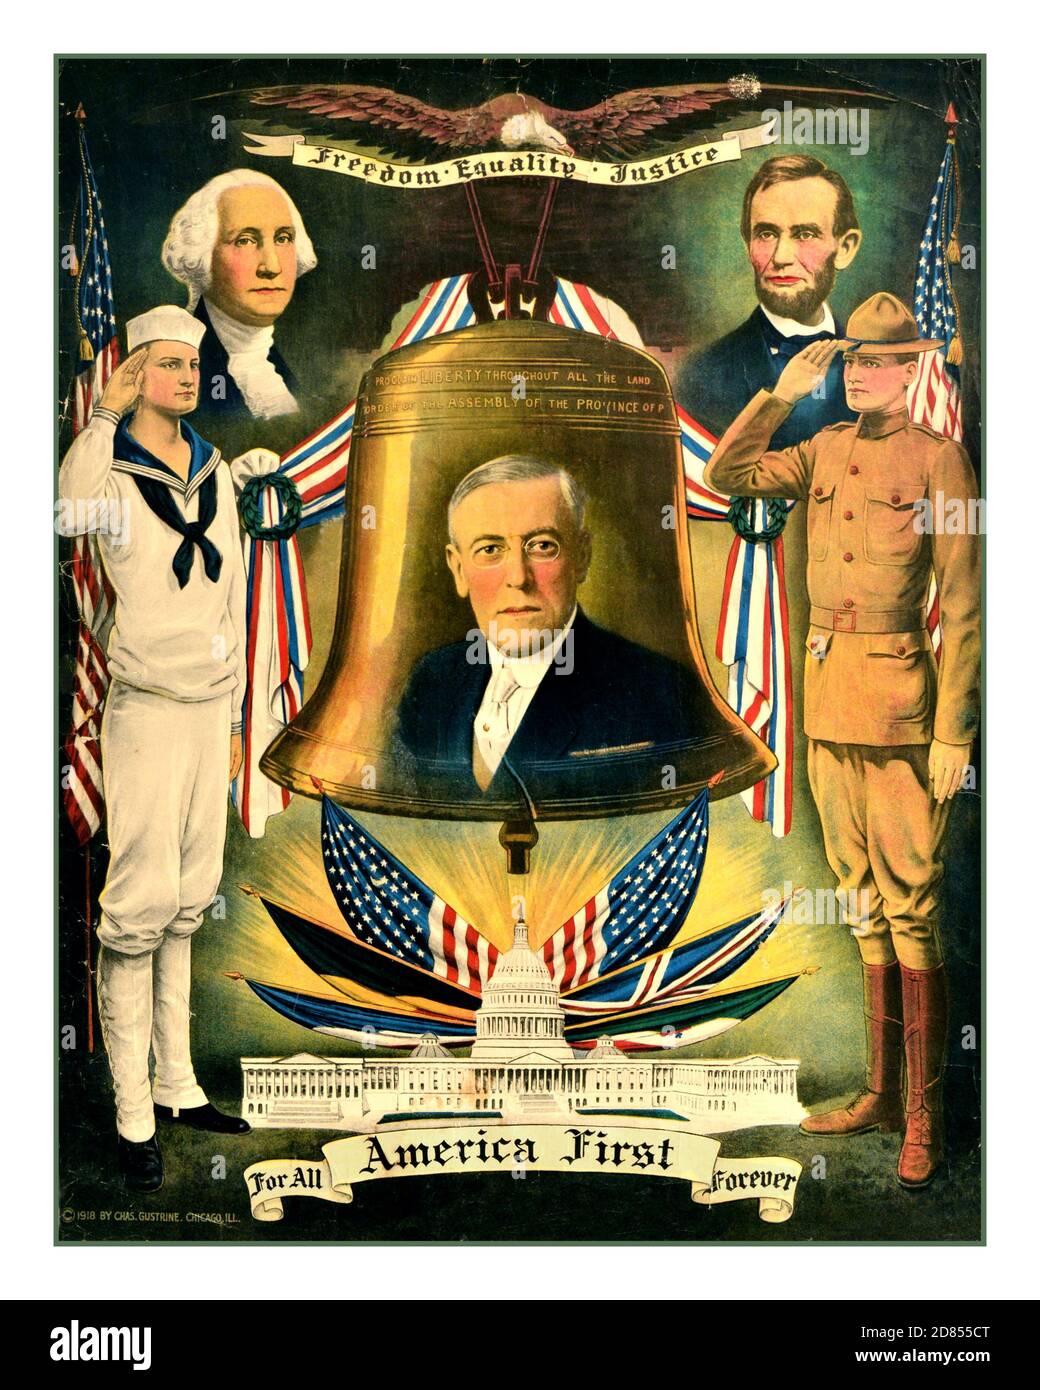 WOODROW WILSON 1900’s USA PROPAGANDA POSTER AMERICA FIRST Original vintage propaganda political poster, published in 1918 in Chicago and features three important American presidents - the incumbent 26th President at the time, Woodrow Wilson (1856-1924), the First American President George Washington (1732-1799), and 16th President Abraham Lincoln (1809-1865). The artwork also features a bald eagle carrying a US Naval Ship's bell, a naval midshipman and a cavalryman saluting the American flags, with Washington D.C. White House below. USA,  designer: Charles Gustrine, 1918 Stock Photo